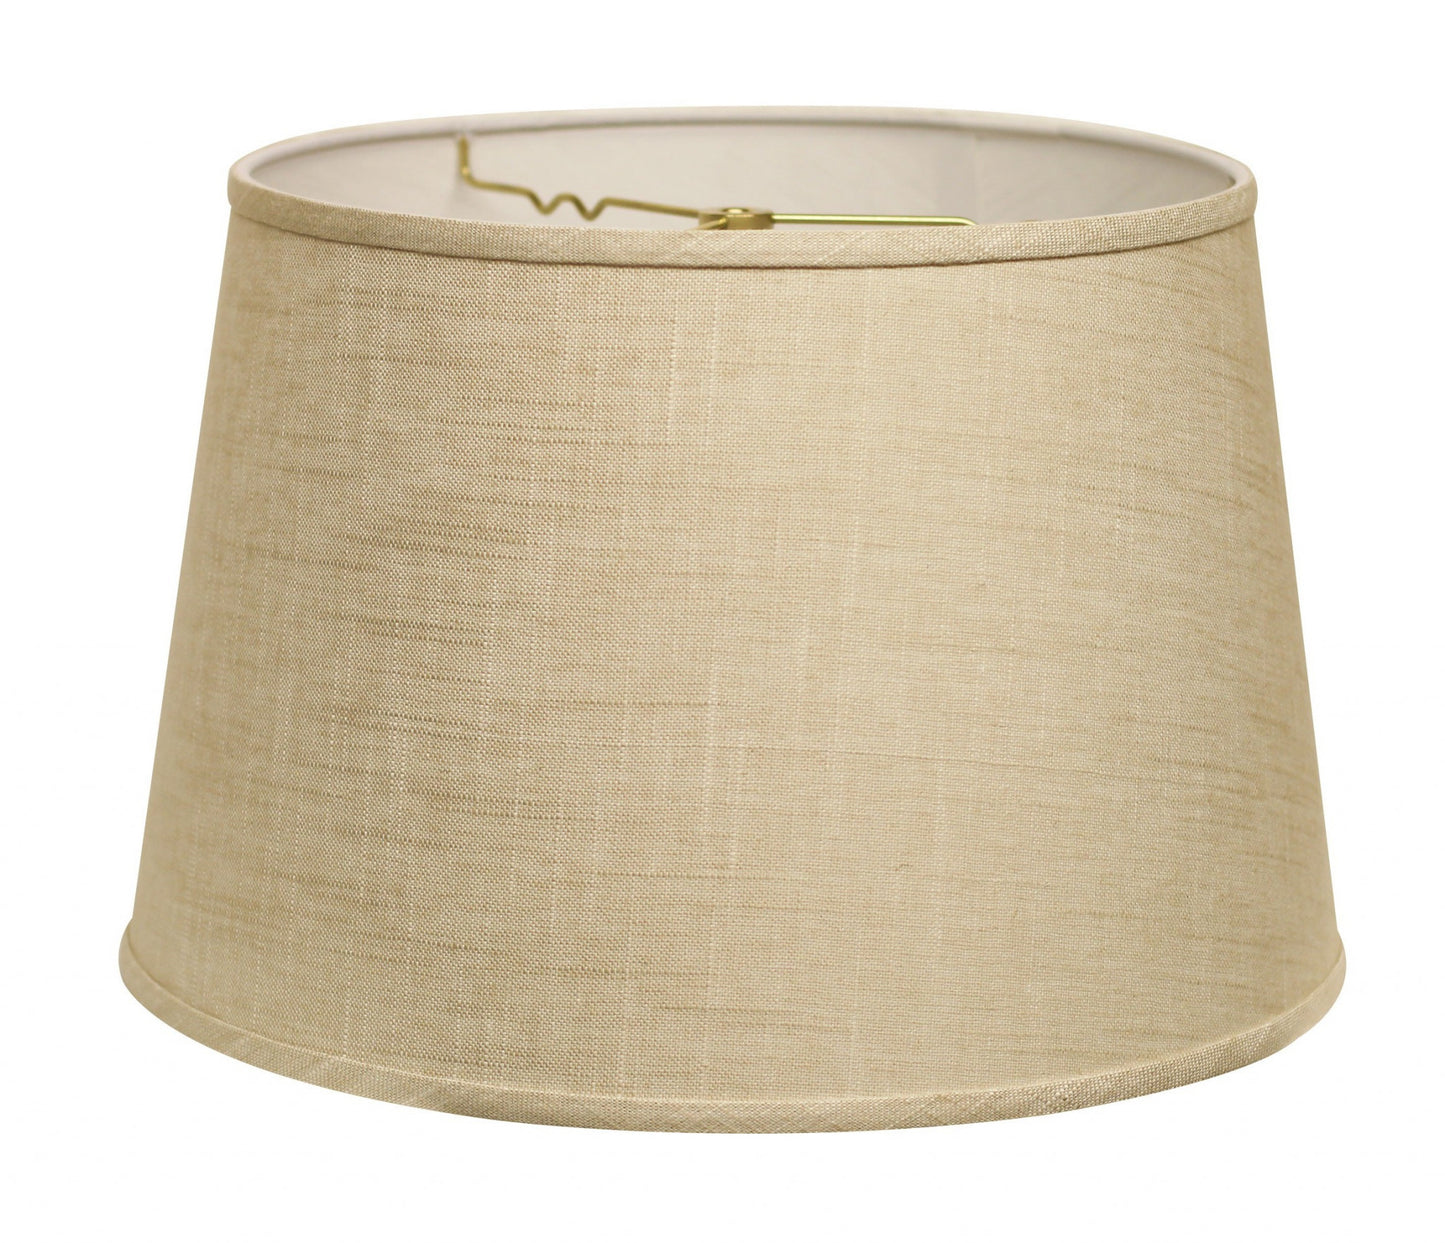 14" Light Wheat Rounded Empire Slanted Linen Lampshade